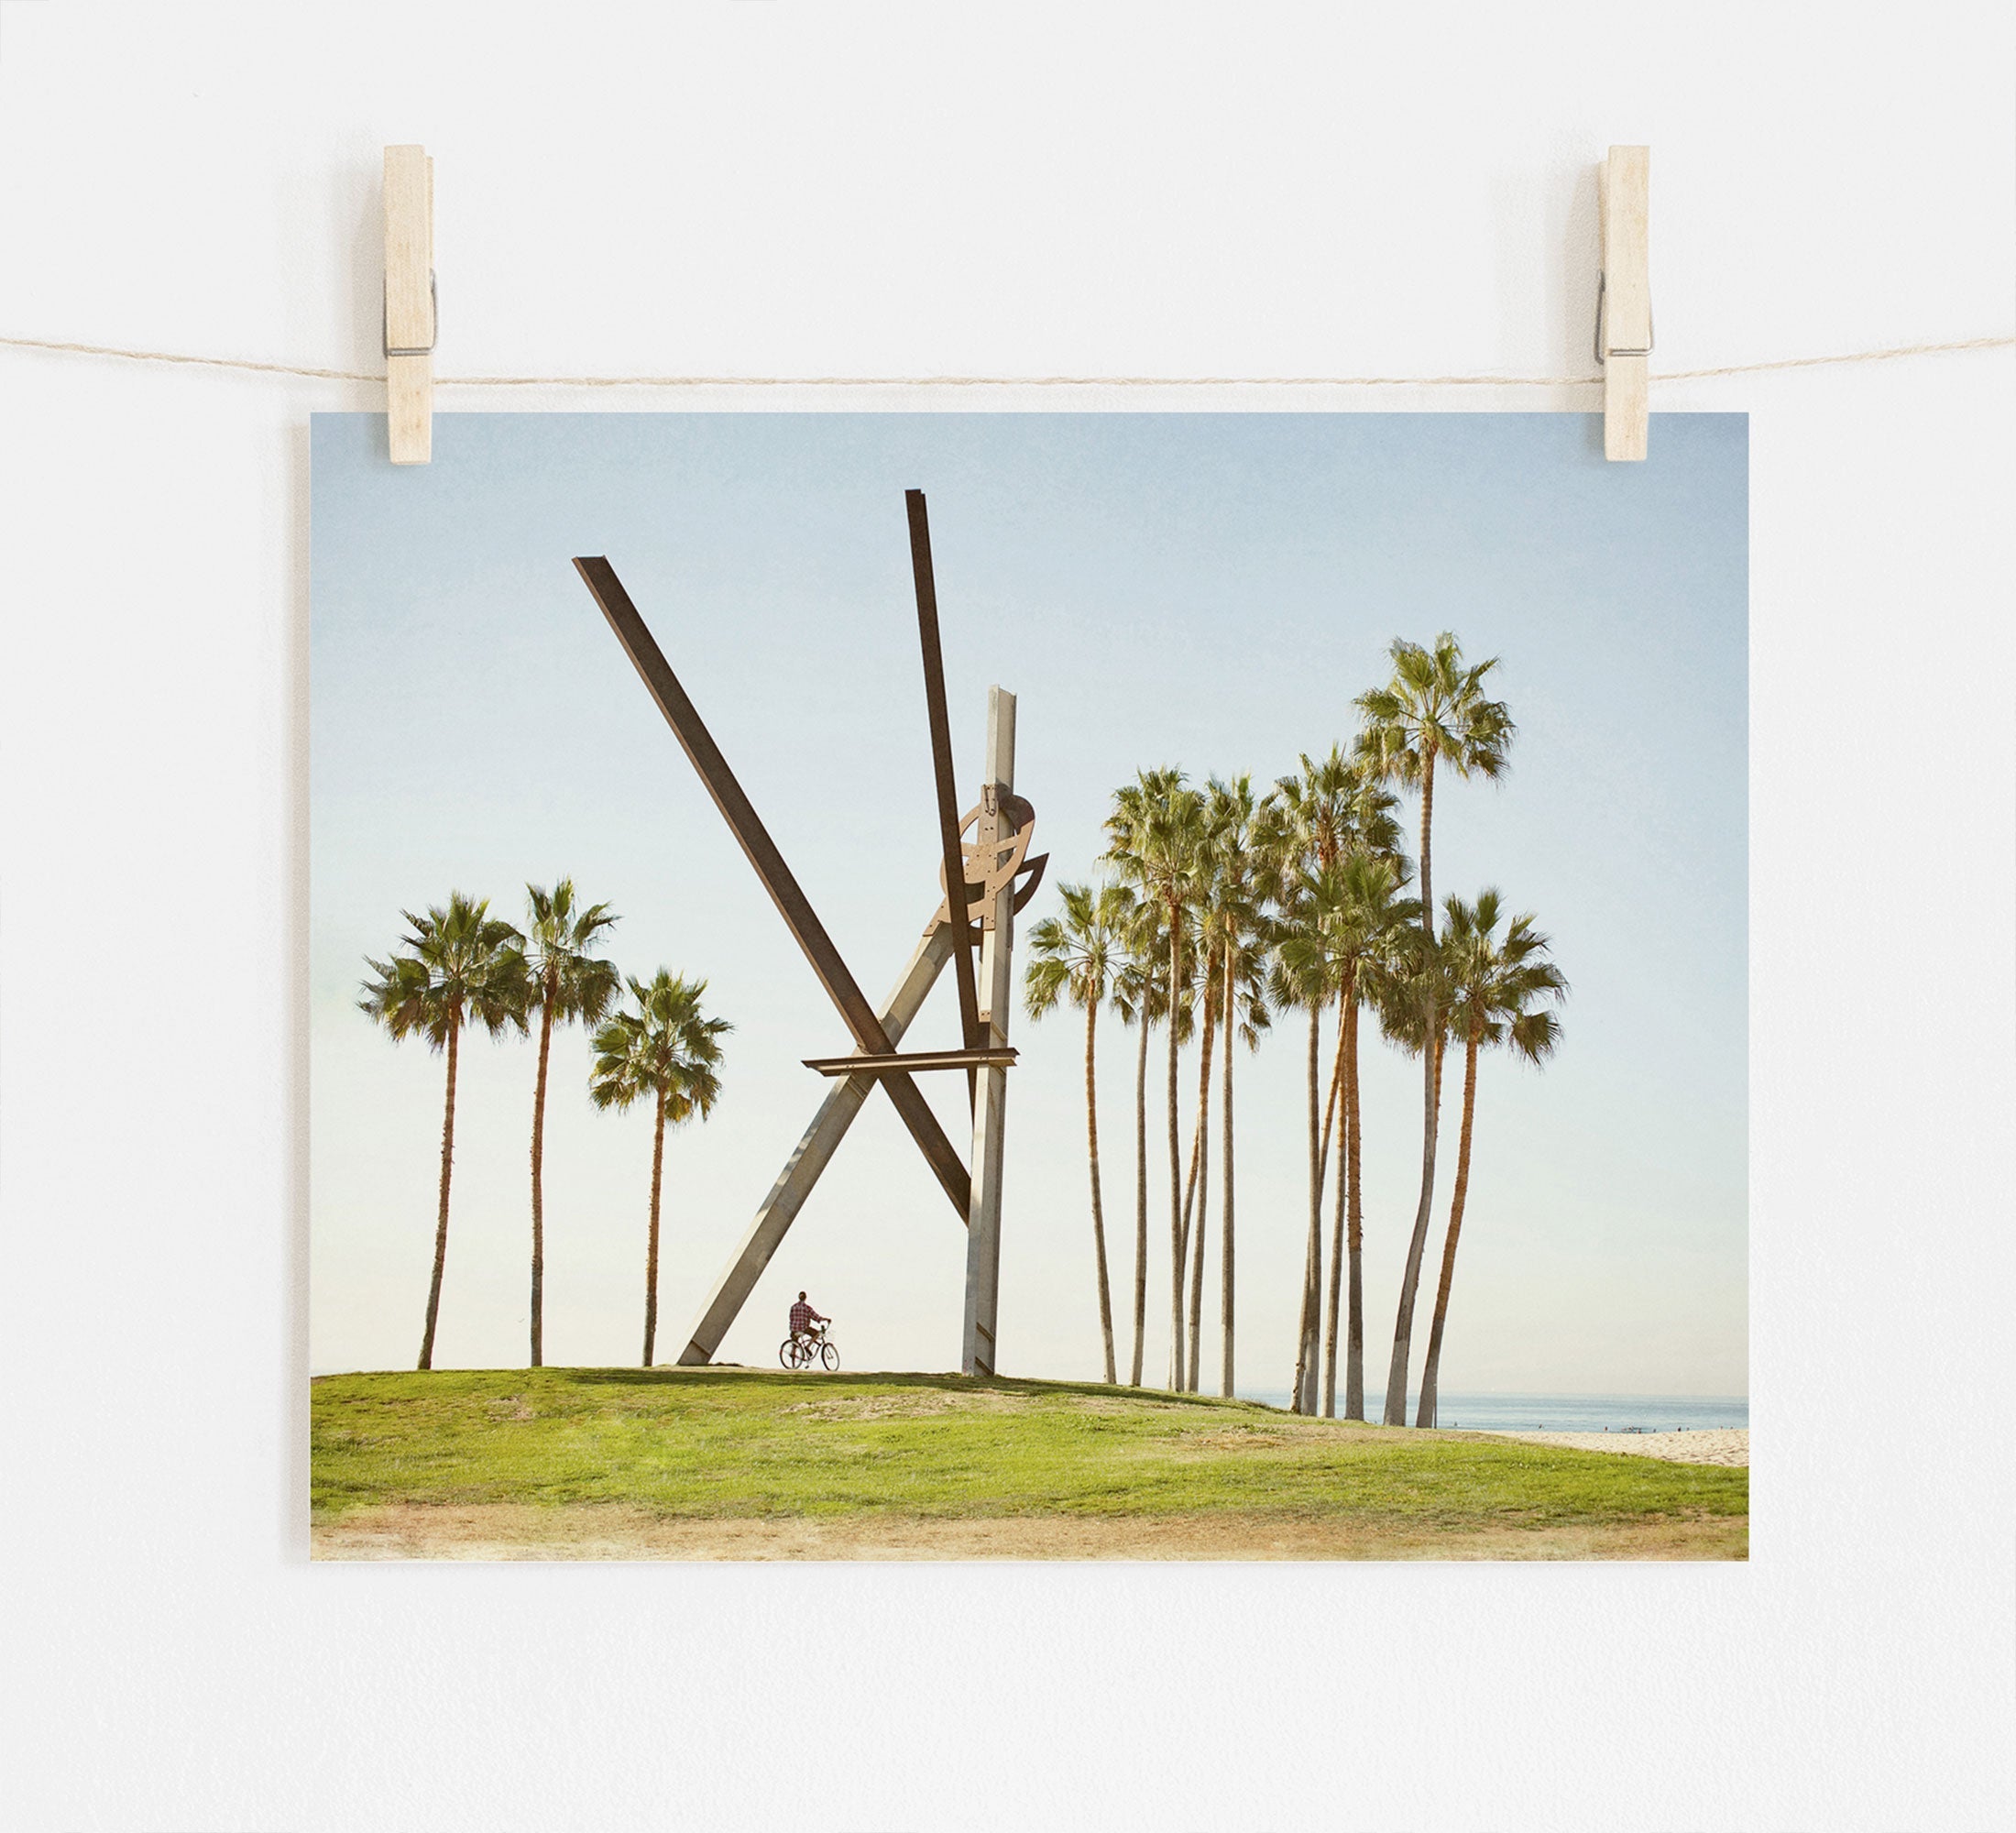 A photograph of the Venice Beach Landmark Sculpture, 'V is for Venice', by Offley Green, surrounded by tall palm trees, printed on archival photographic paper, hangs on a white wall displayed with wooden clips on a string. In the background, a person on a.